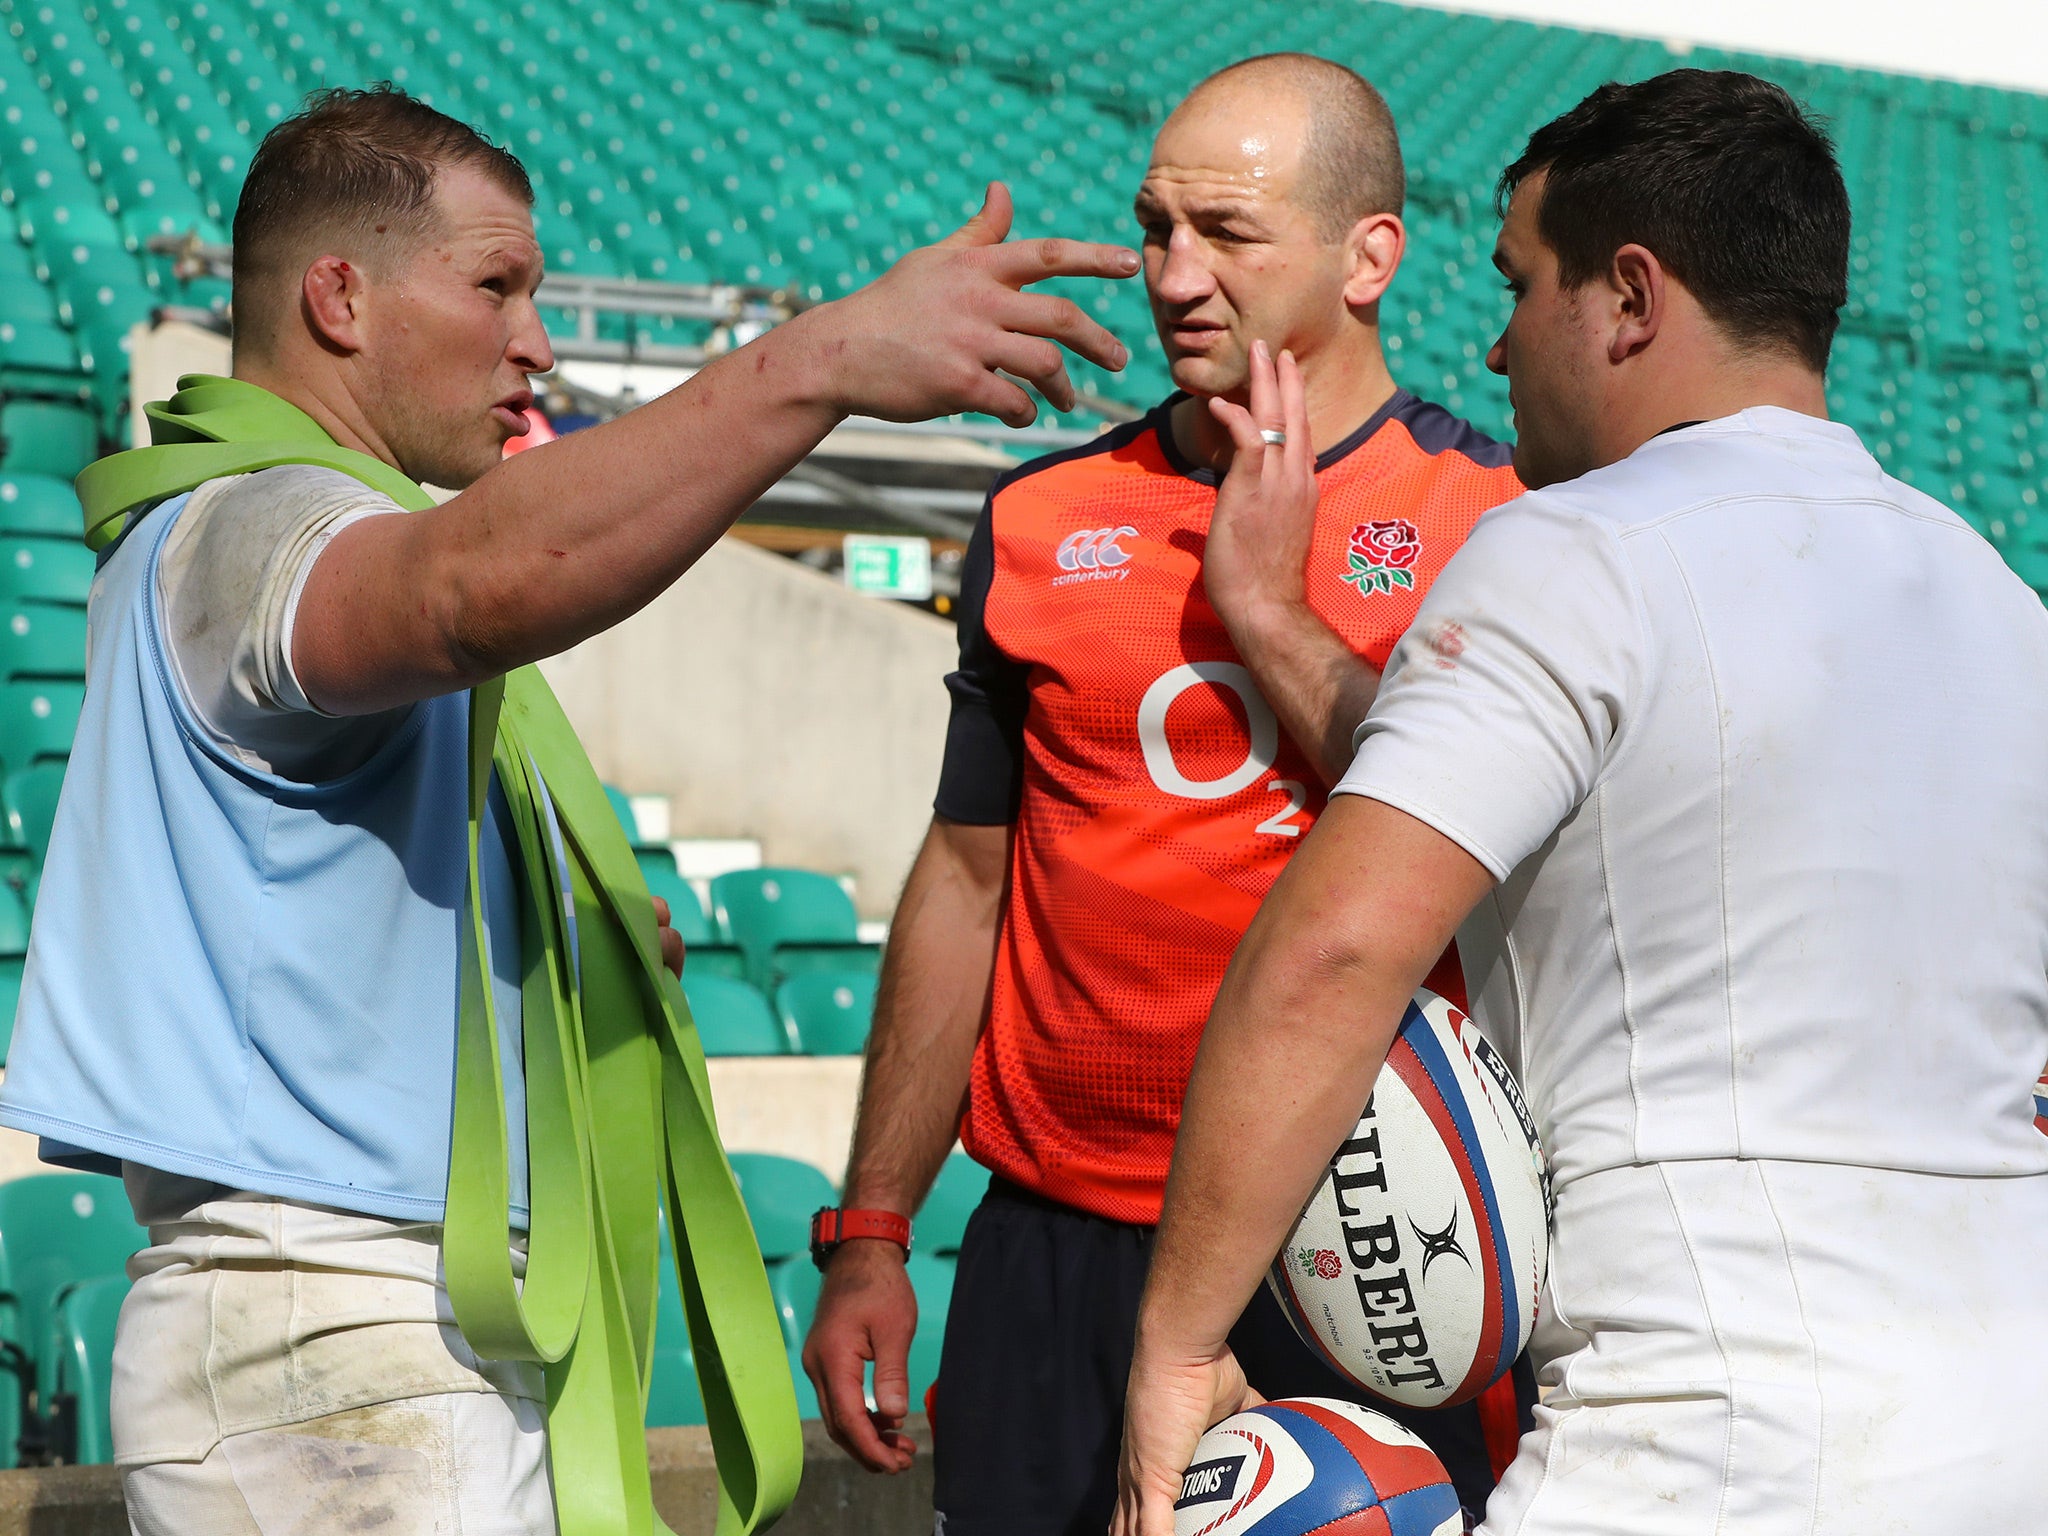 Steve Borthwick described Italy's controversial tactics as a 'good learning experience' for England